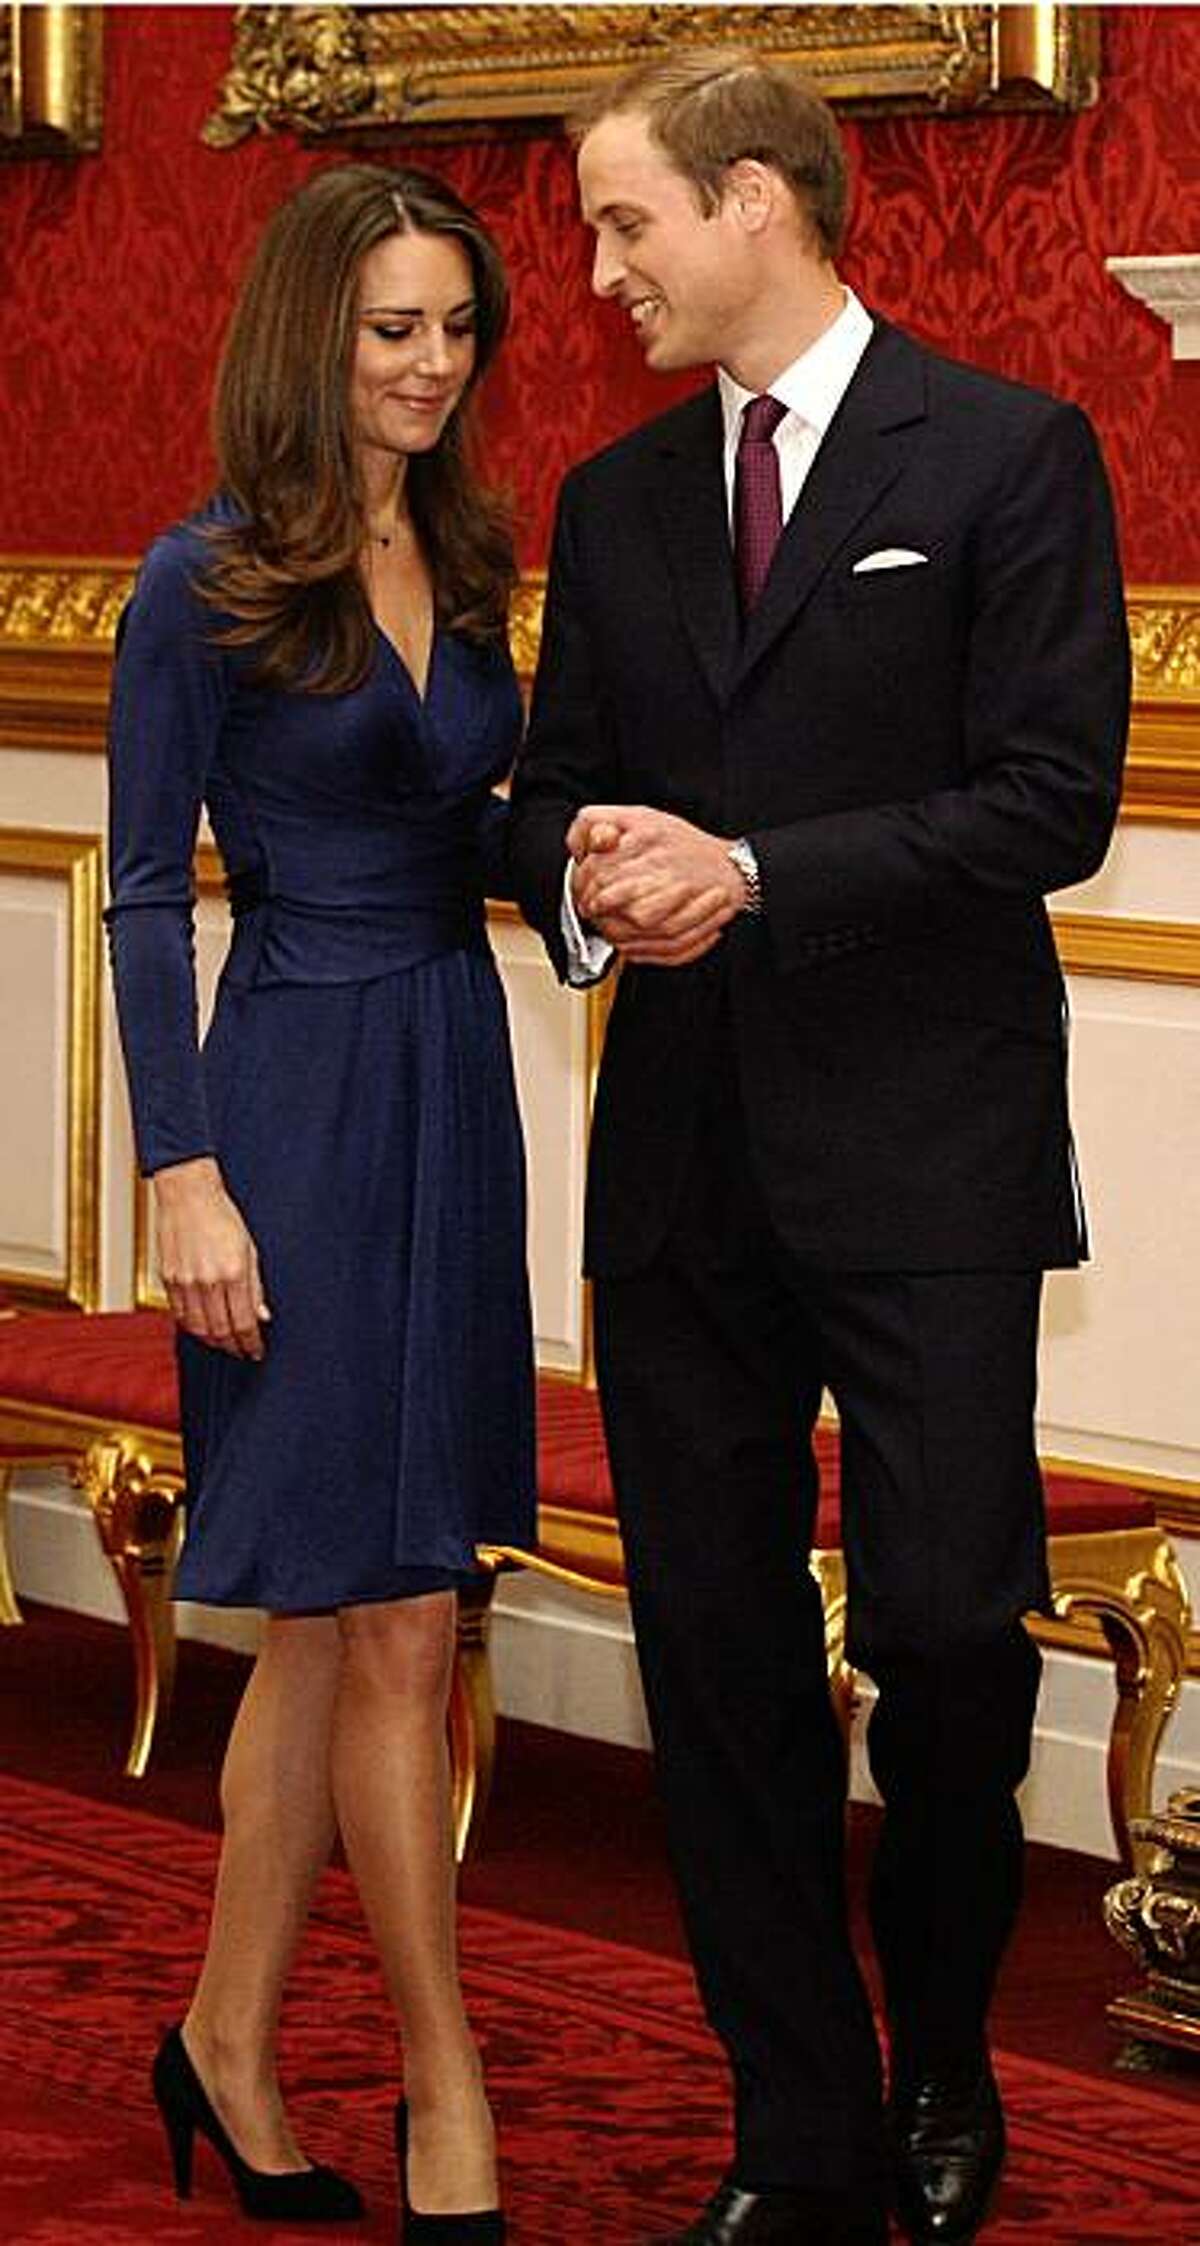 William to marry Middleton in 2011